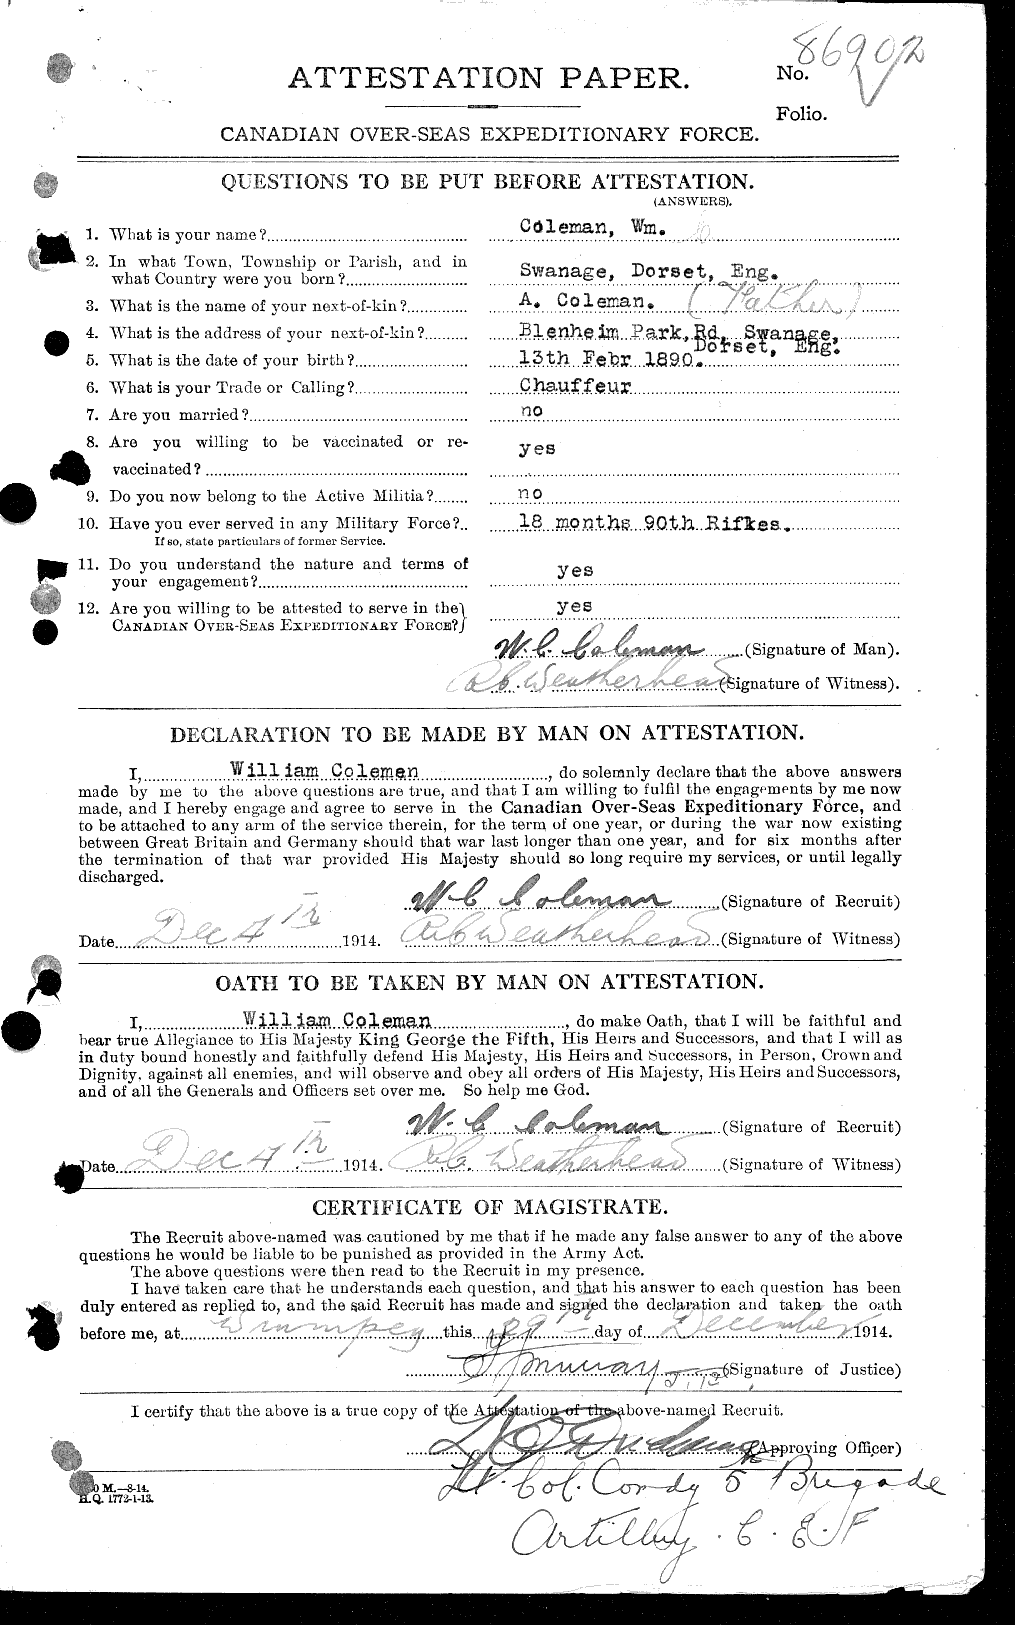 Personnel Records of the First World War - CEF 028294a